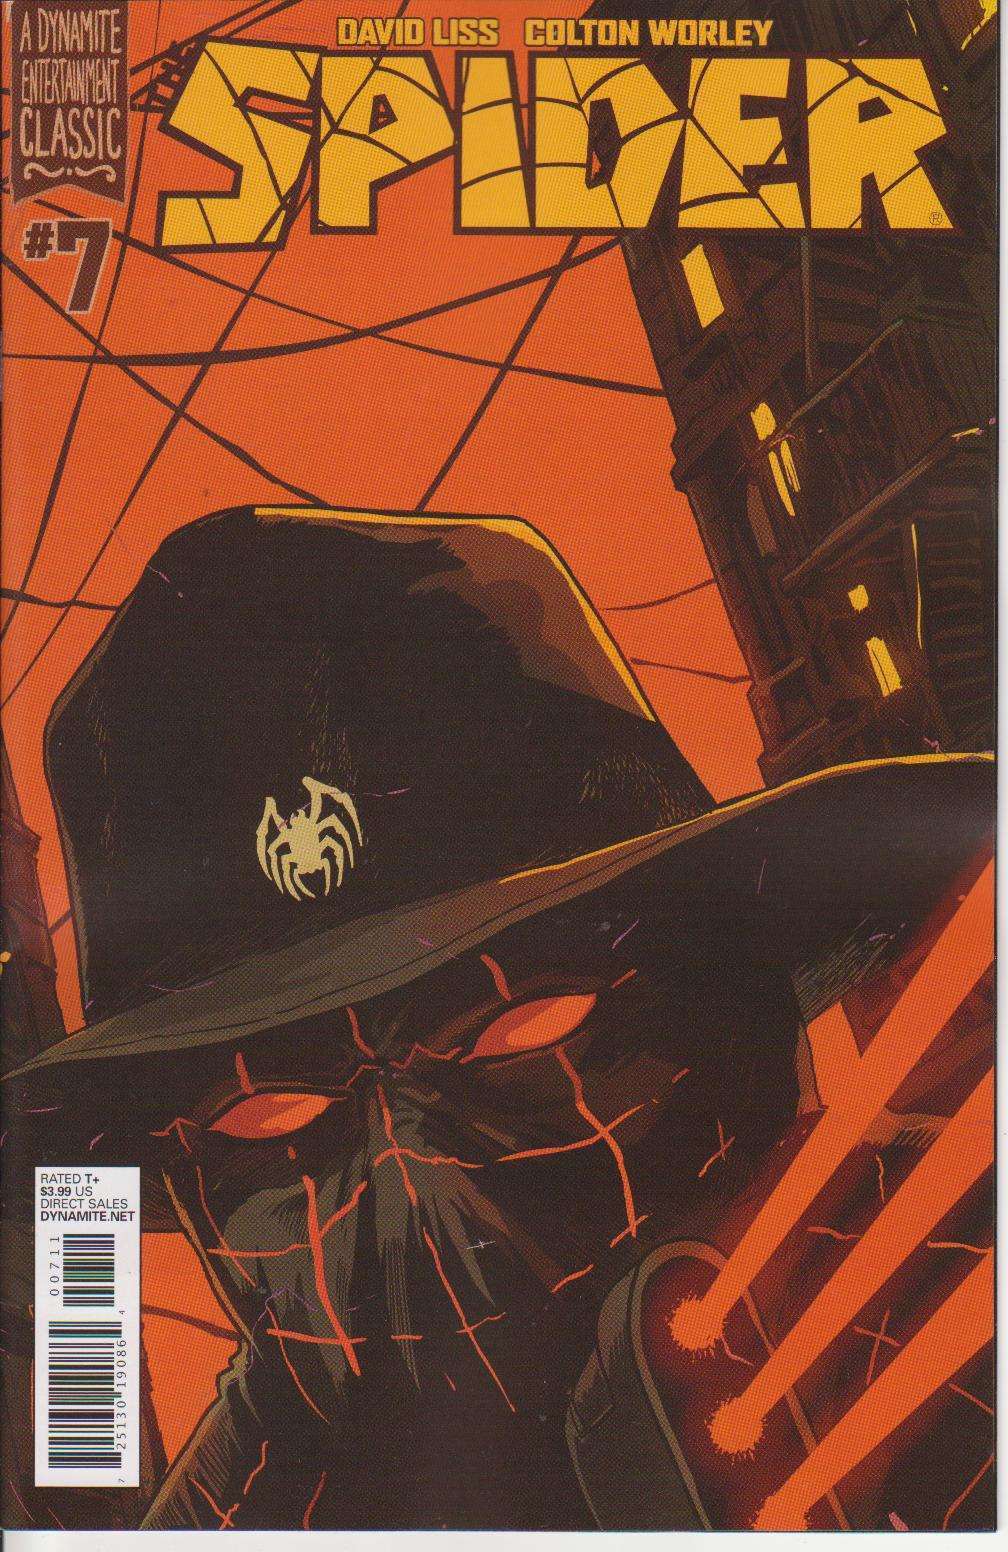 Spider, The (Dynamite) #7A FN; Dynamite | David Liss - we combine shipping